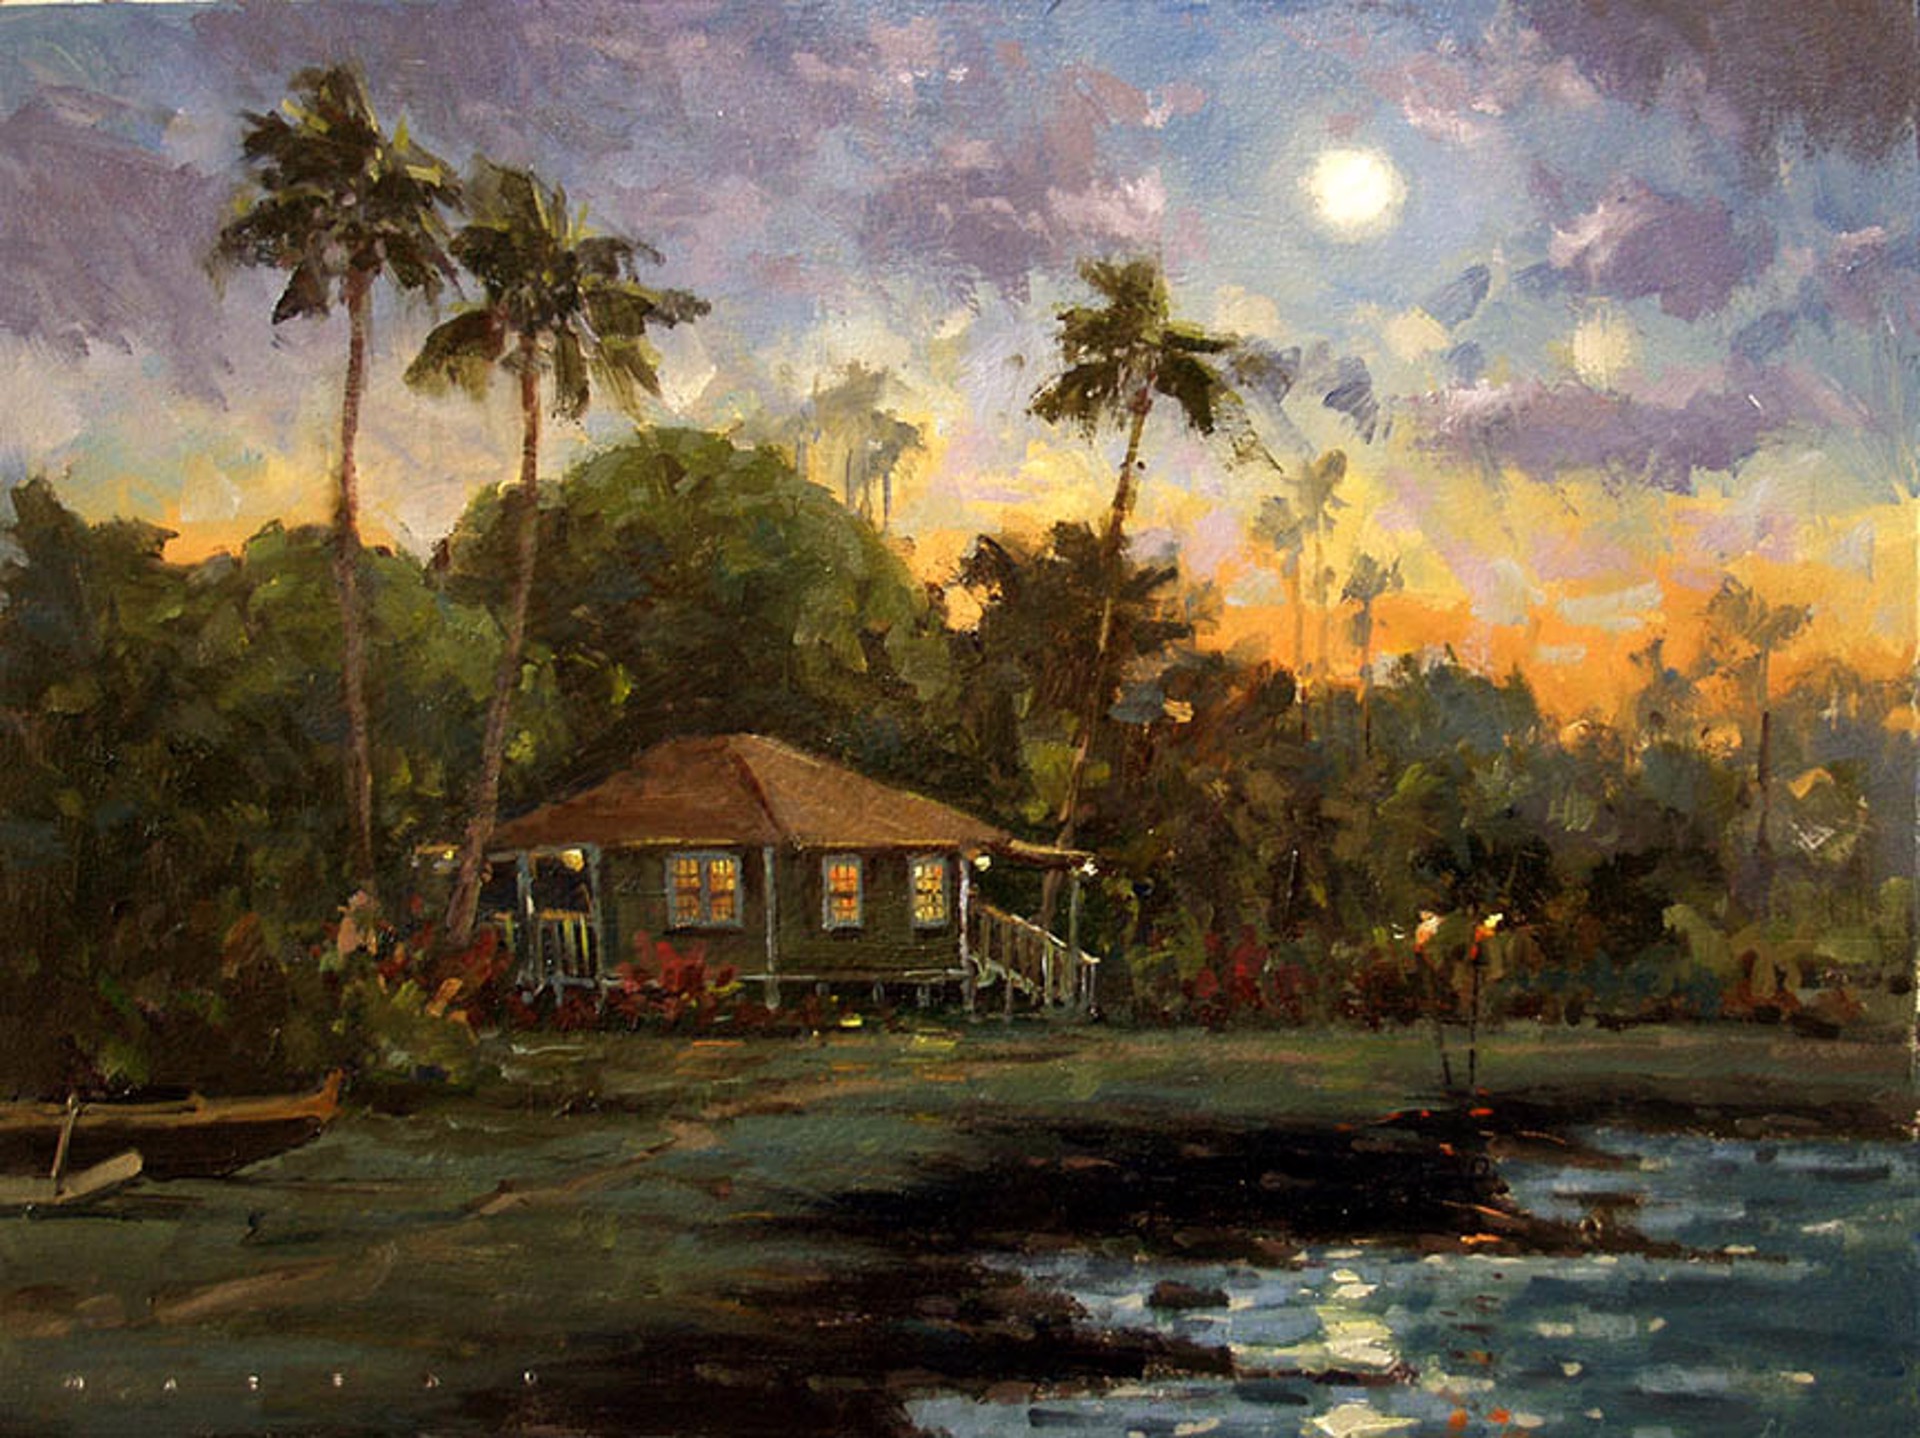 Hawaii Winter Nights - SOLD by Commission Possibilities / Previously Sold ZX